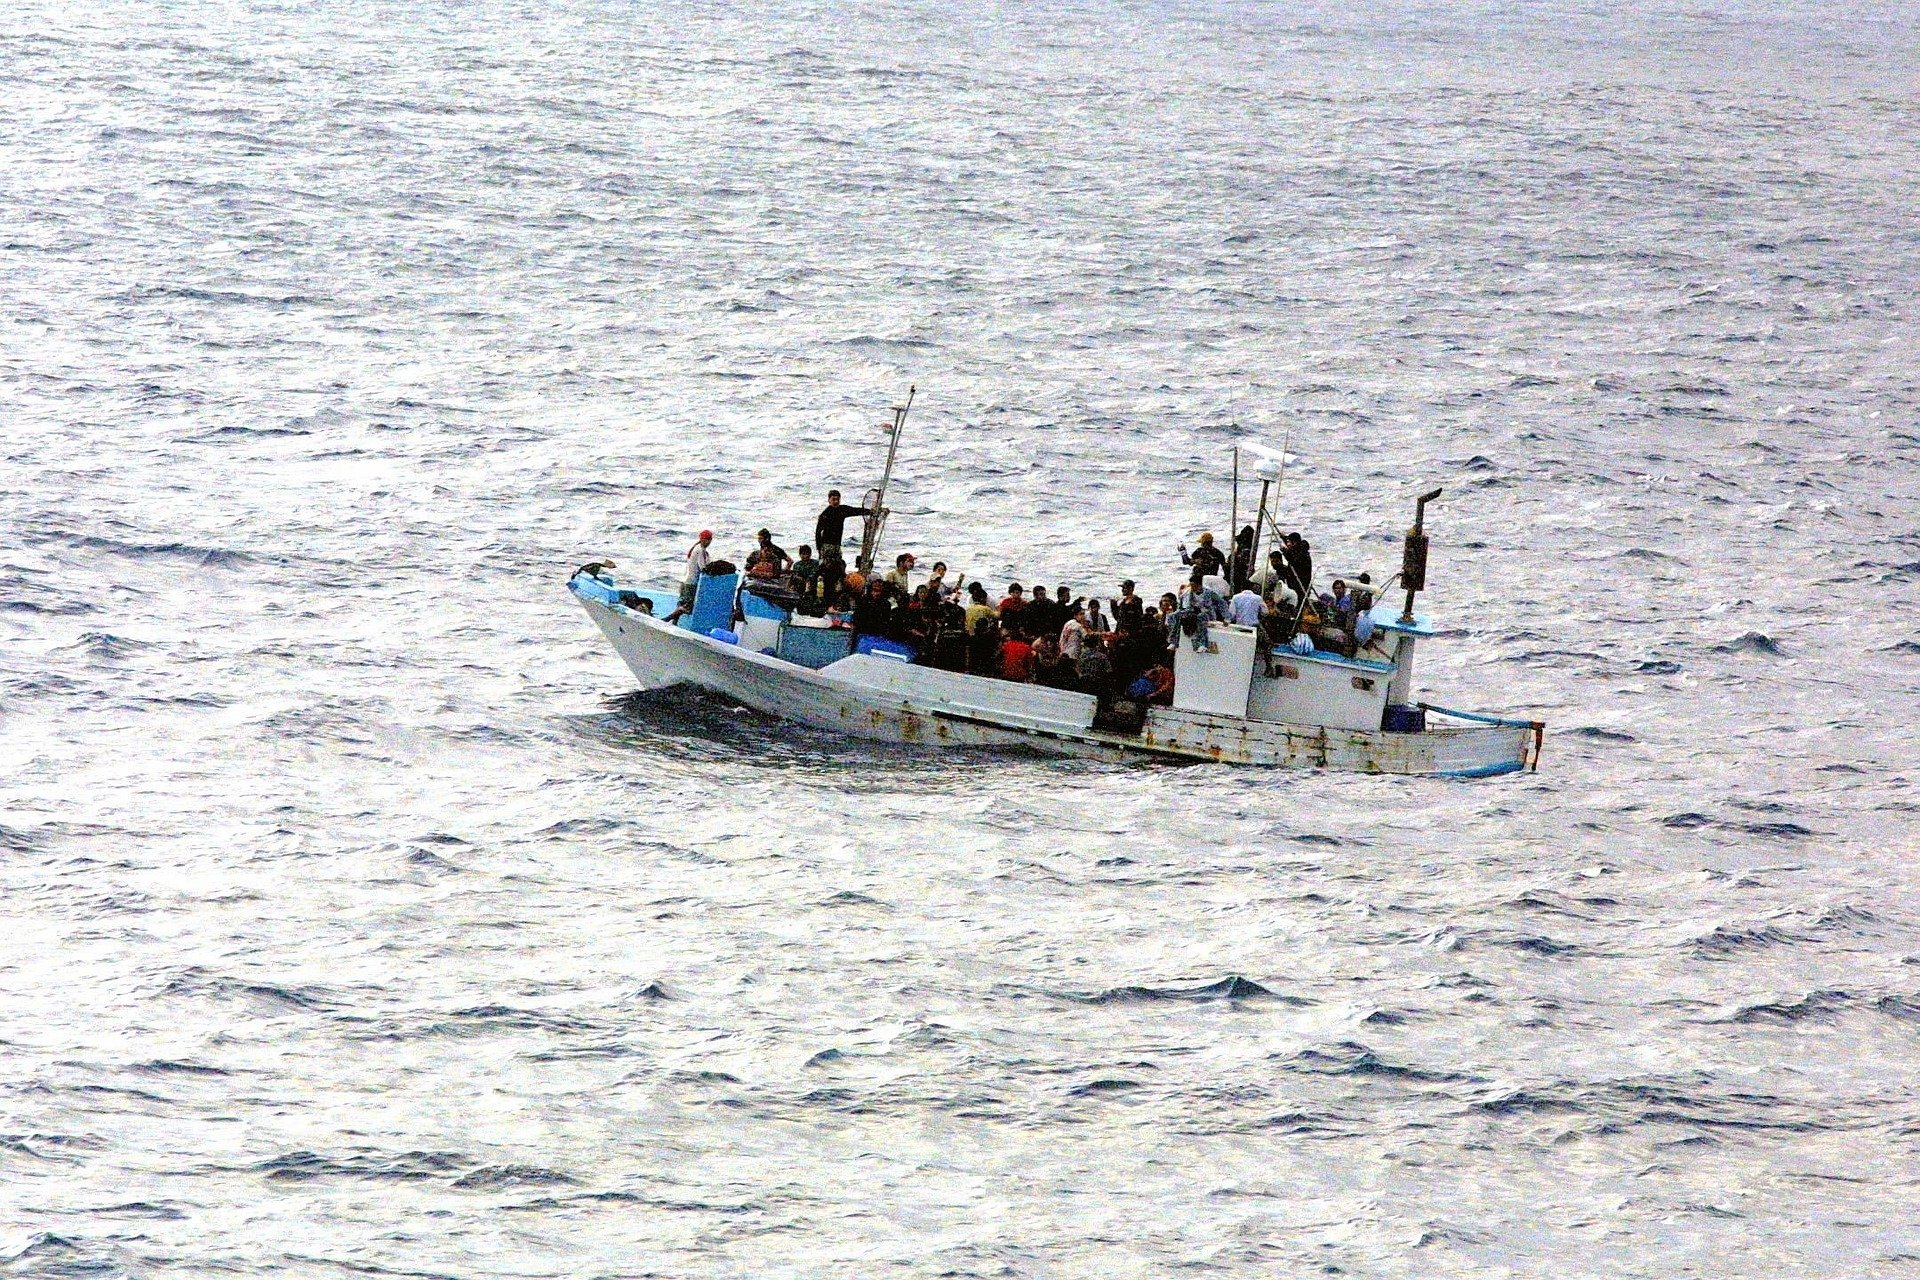 Costa Blanca people smuggling gang charged €5,000 for dangerous boat journey to Spain